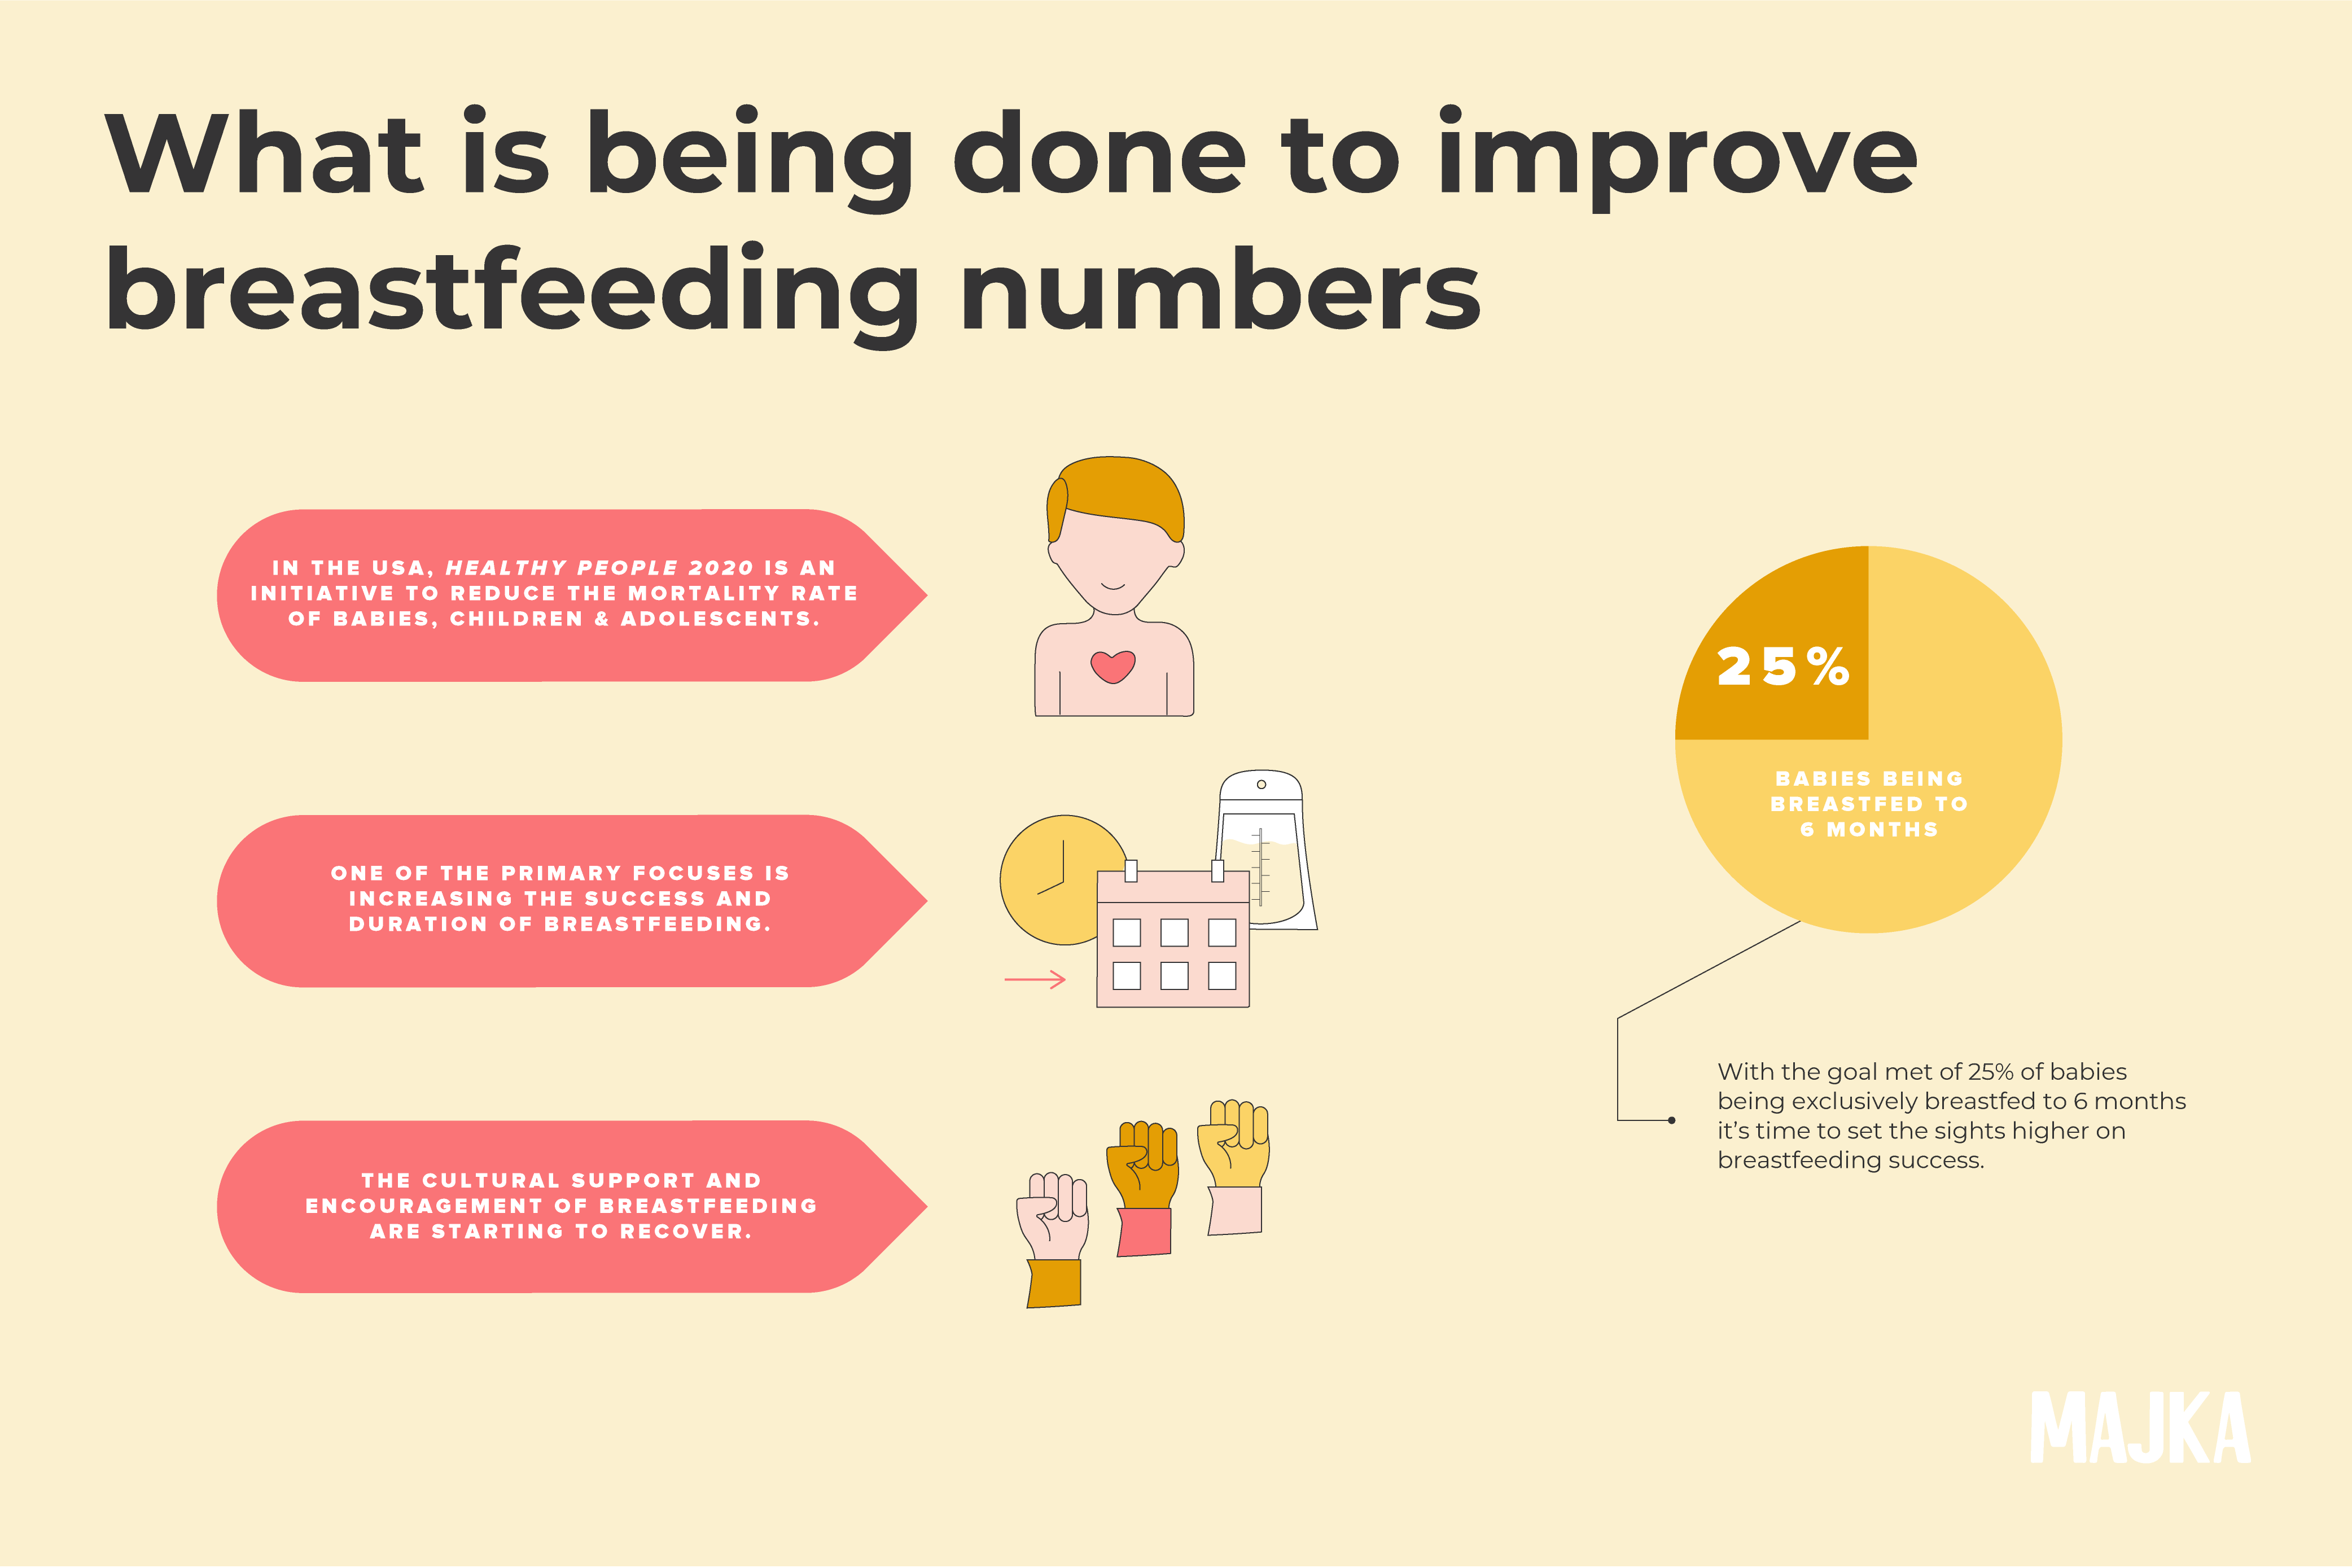 What Is Being Done to Improve Breastfeeding Numbers